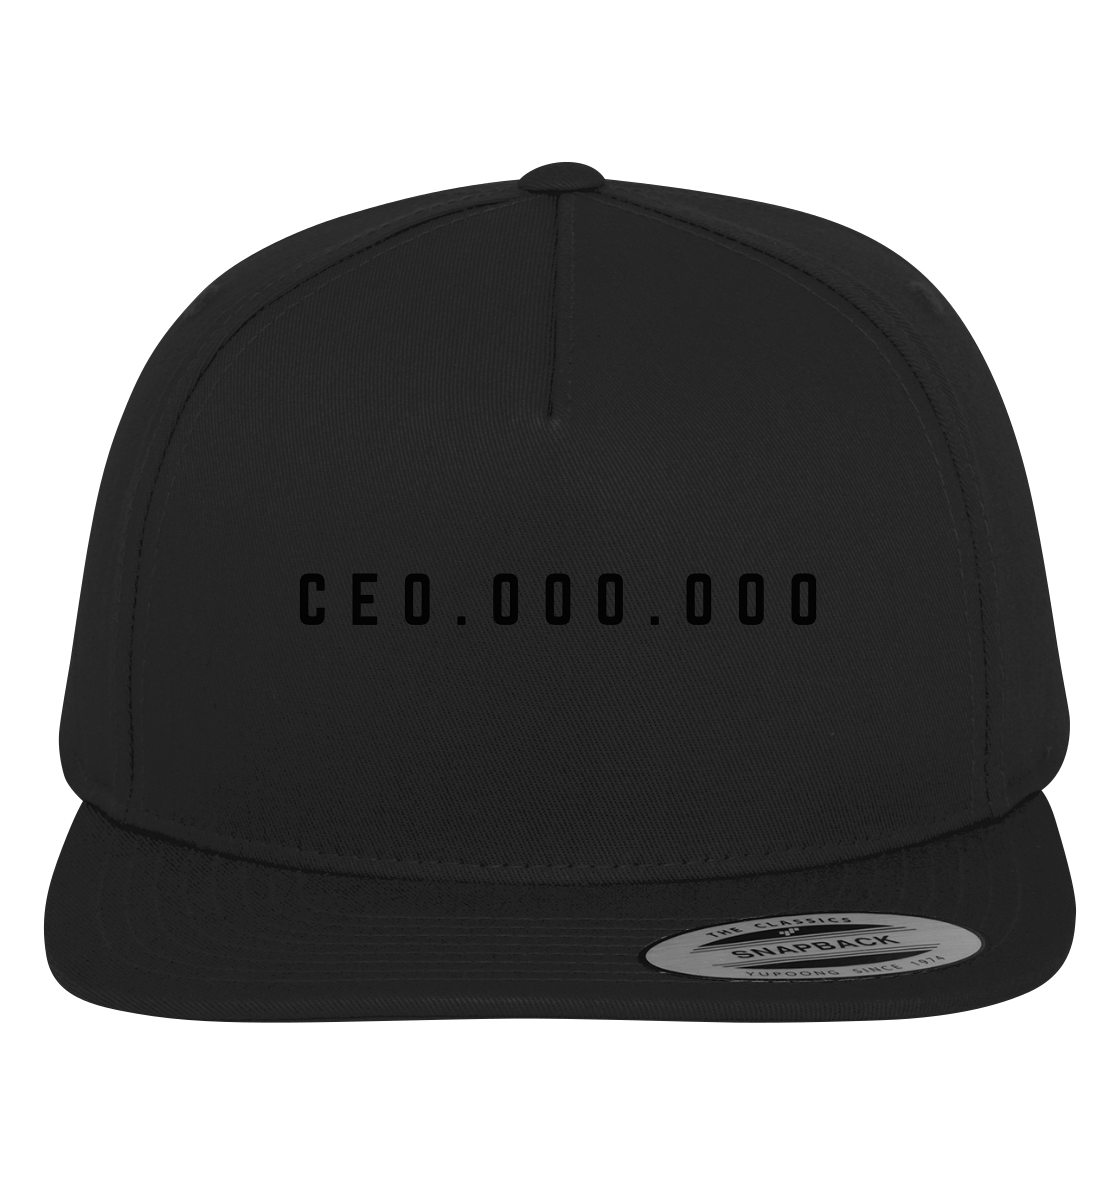 CEO.OOO.OOO COLLECTION by LIMITLOS - Premium Snapback